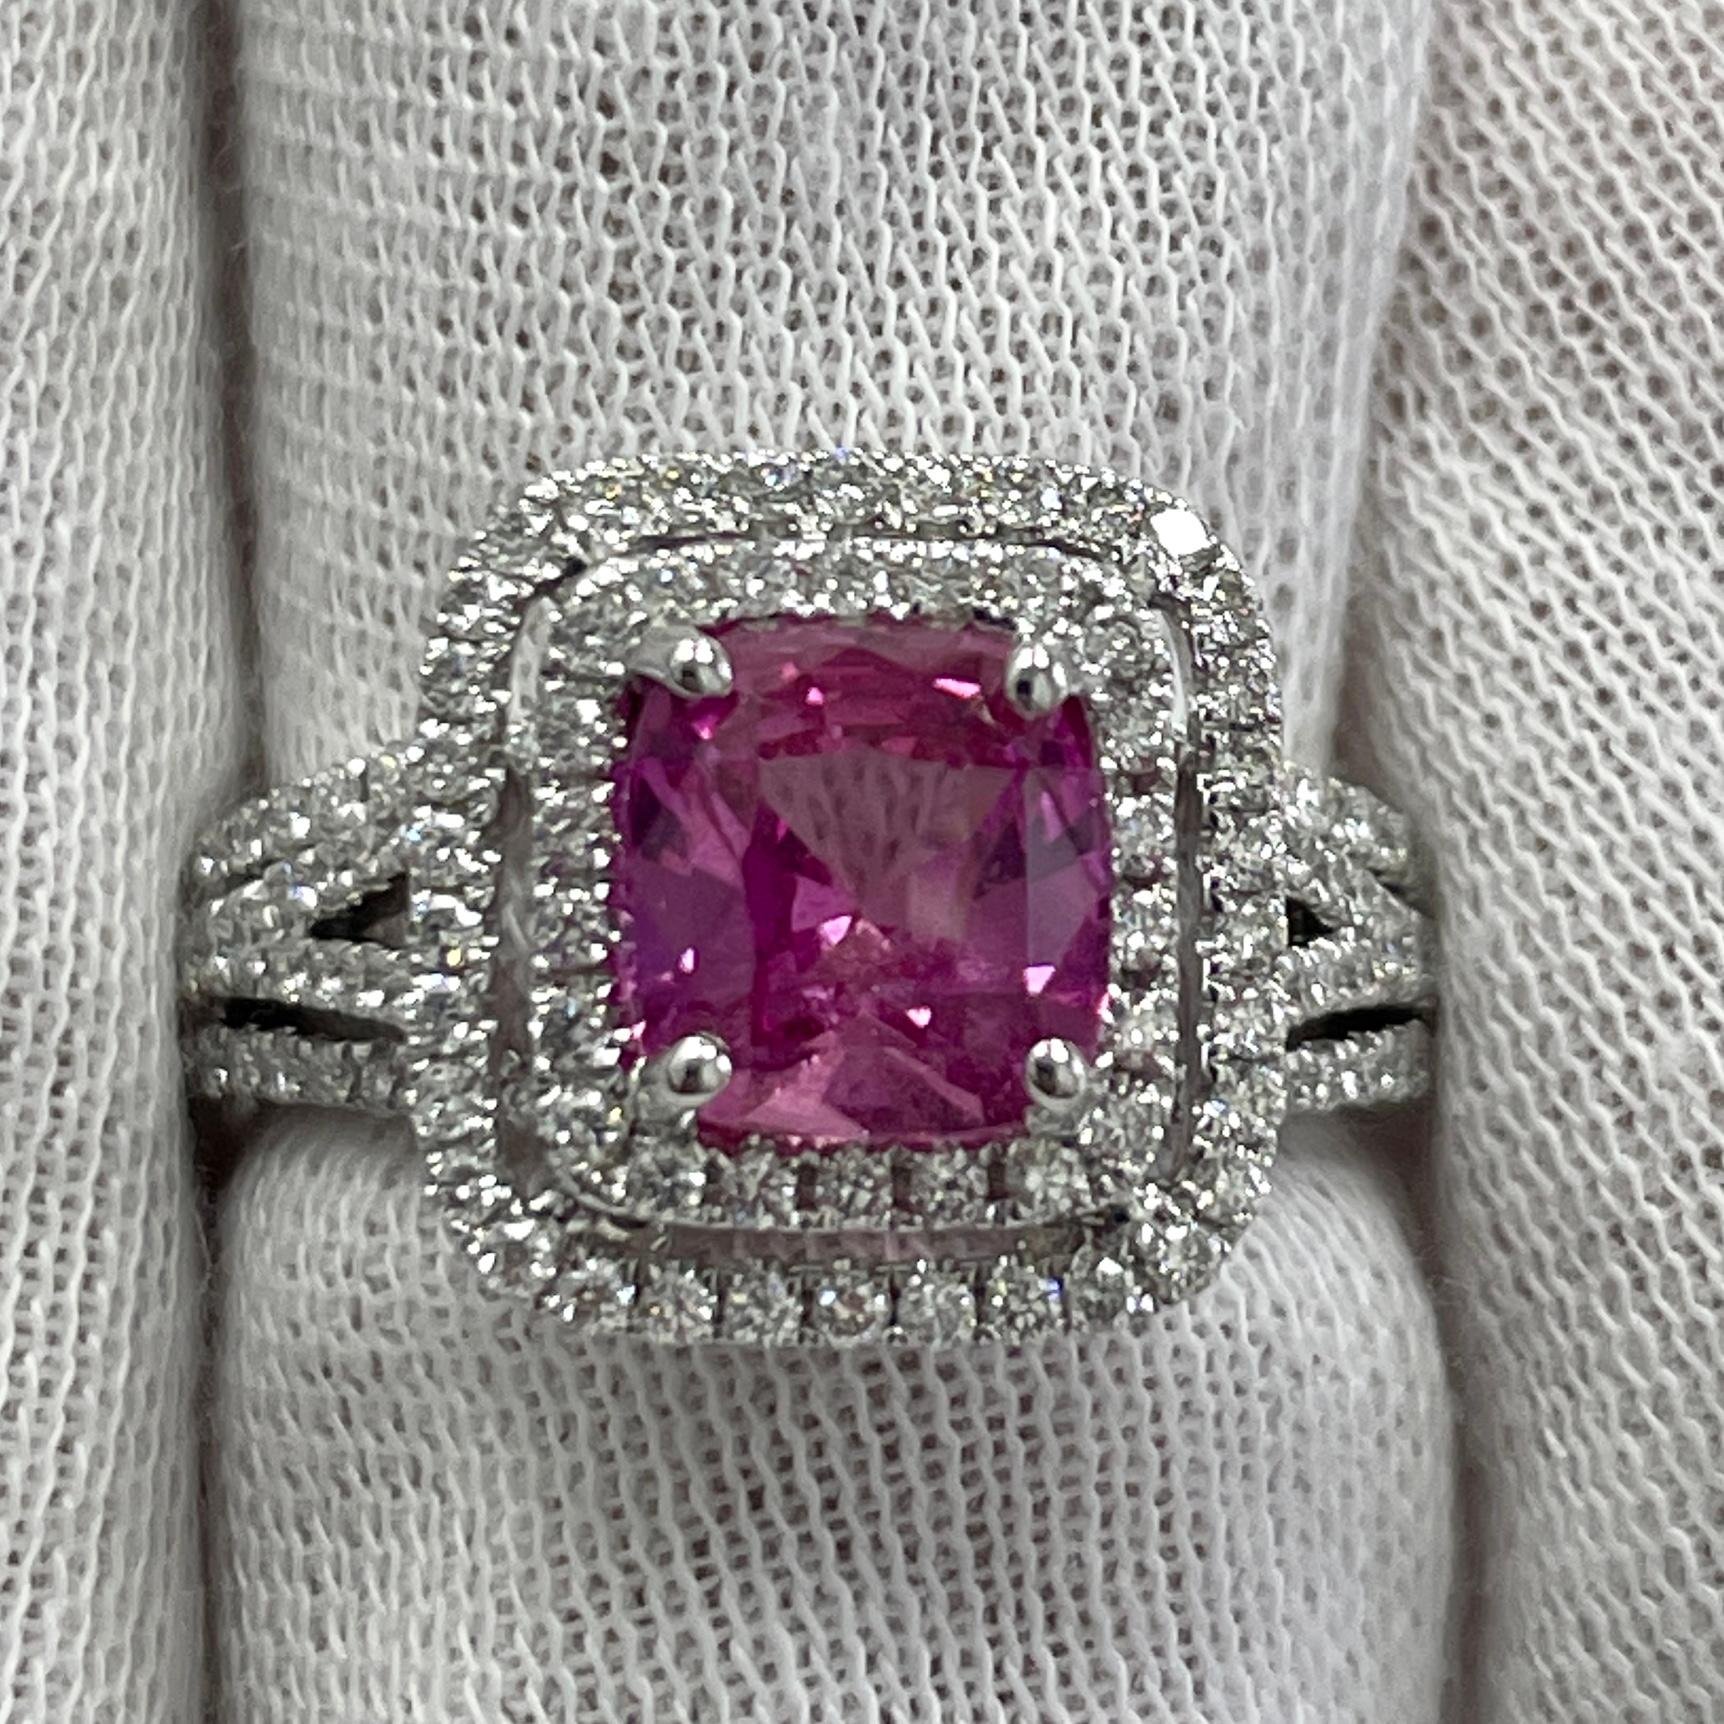 This is a STUNNING pink sapphire, mounted in an elegant 18K white gold and diamond ring with 0.74Ct of brilliant white diamonds. Suitable for any occasion!